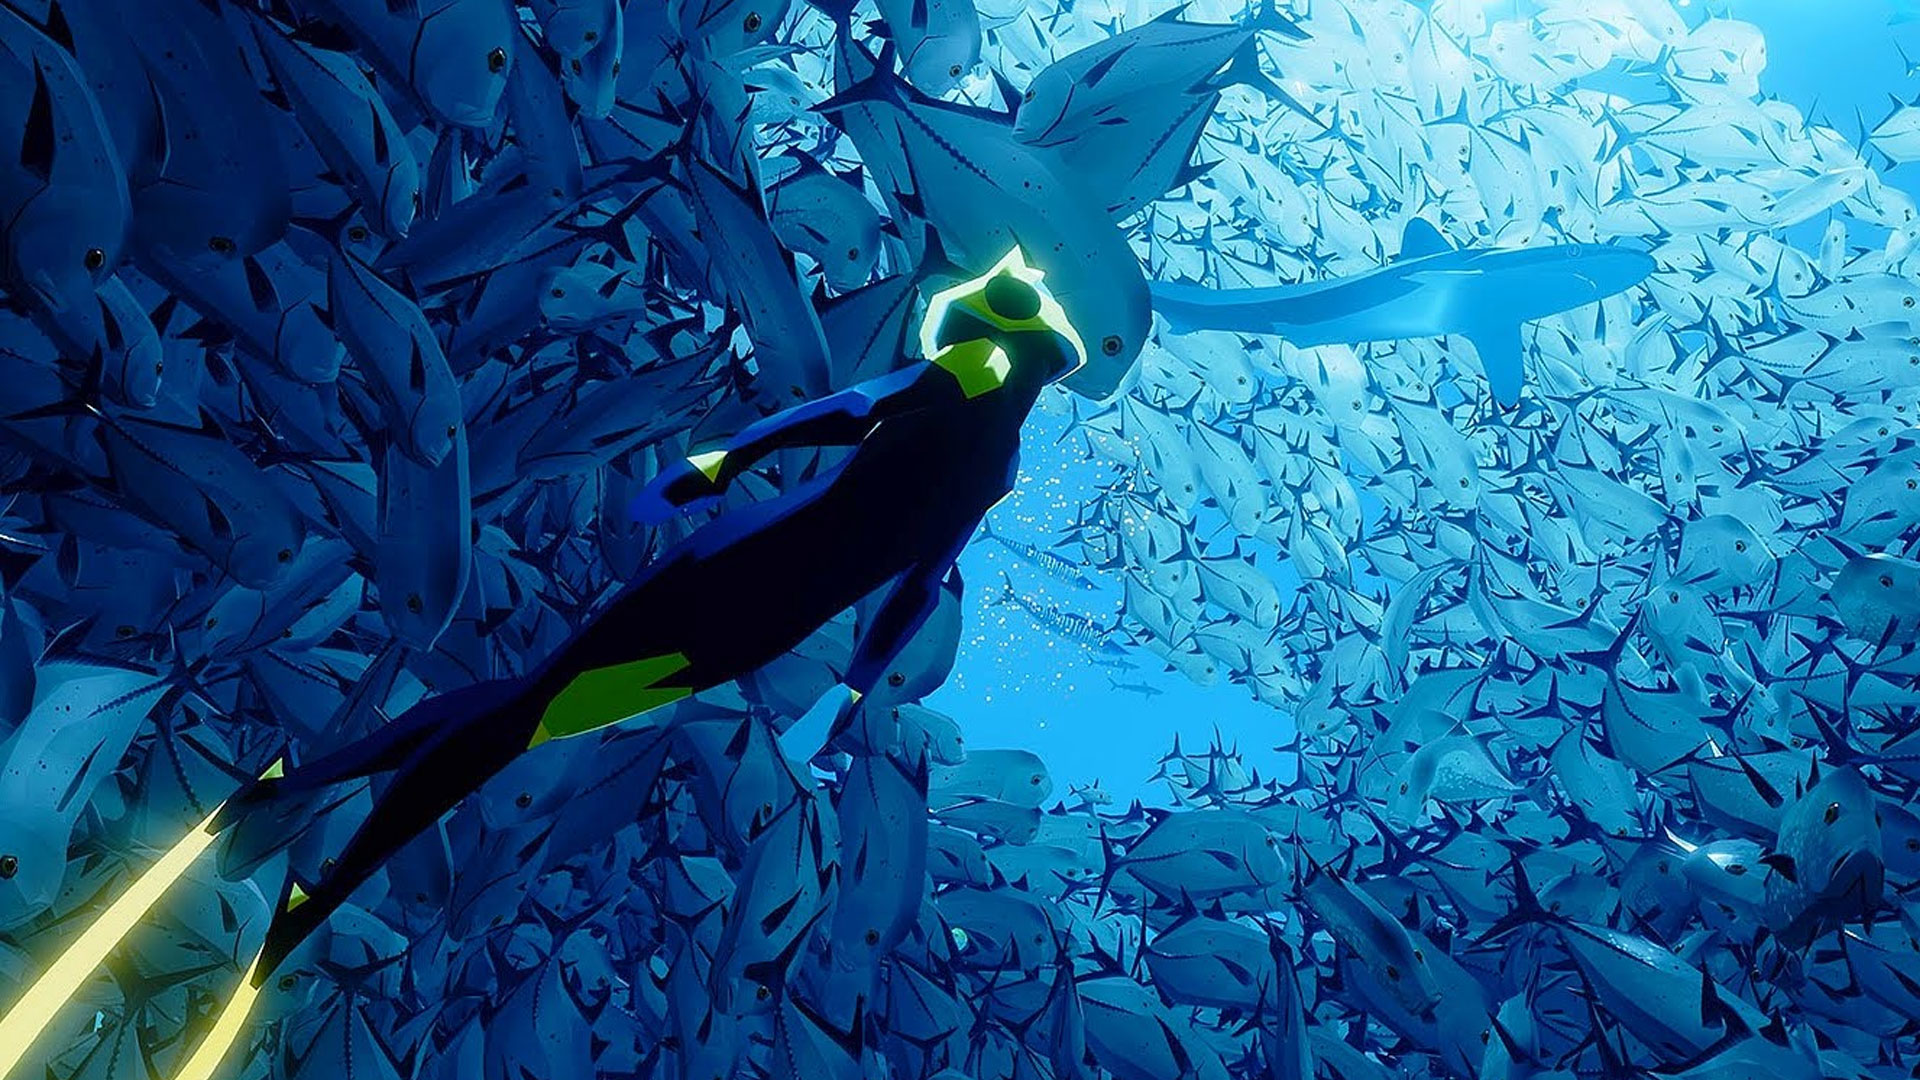 abzu system requirements